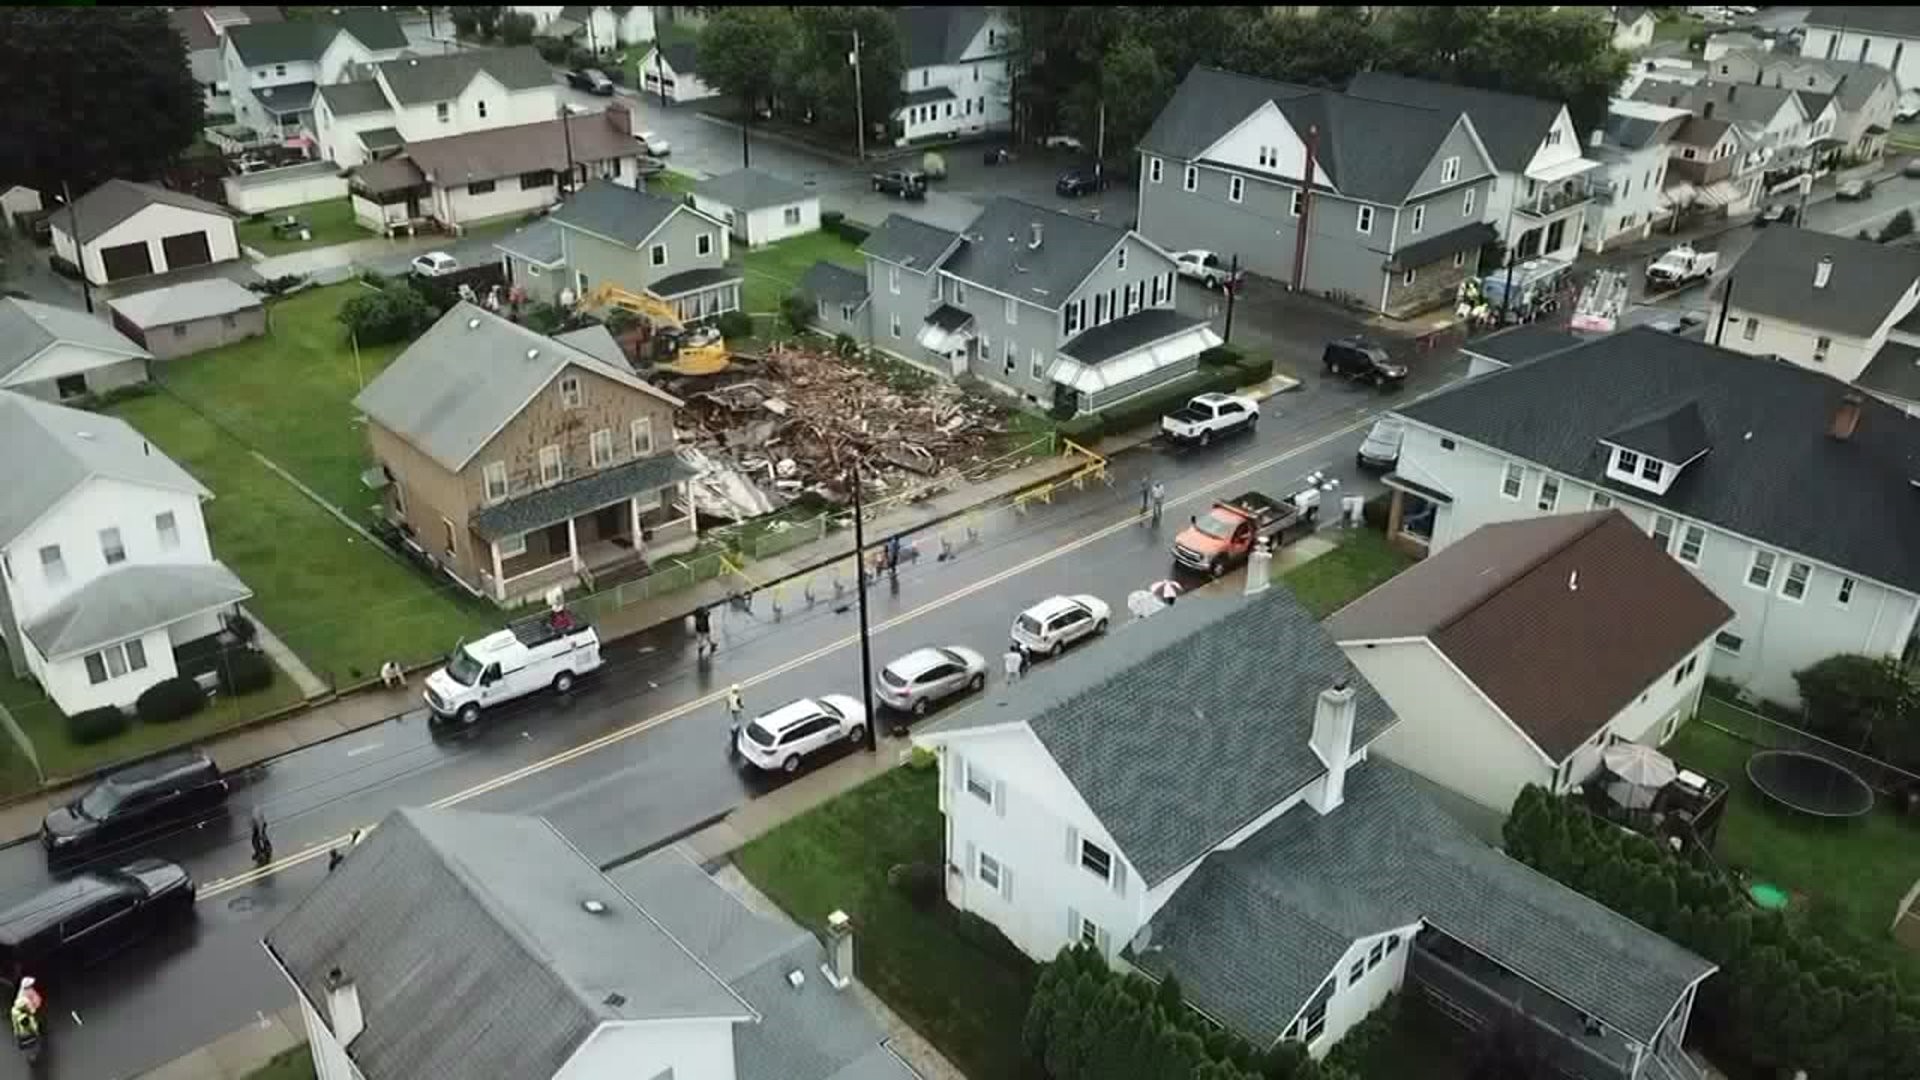 `I thought the end of the world was coming` - Neighbors React To Taylor House Explosion